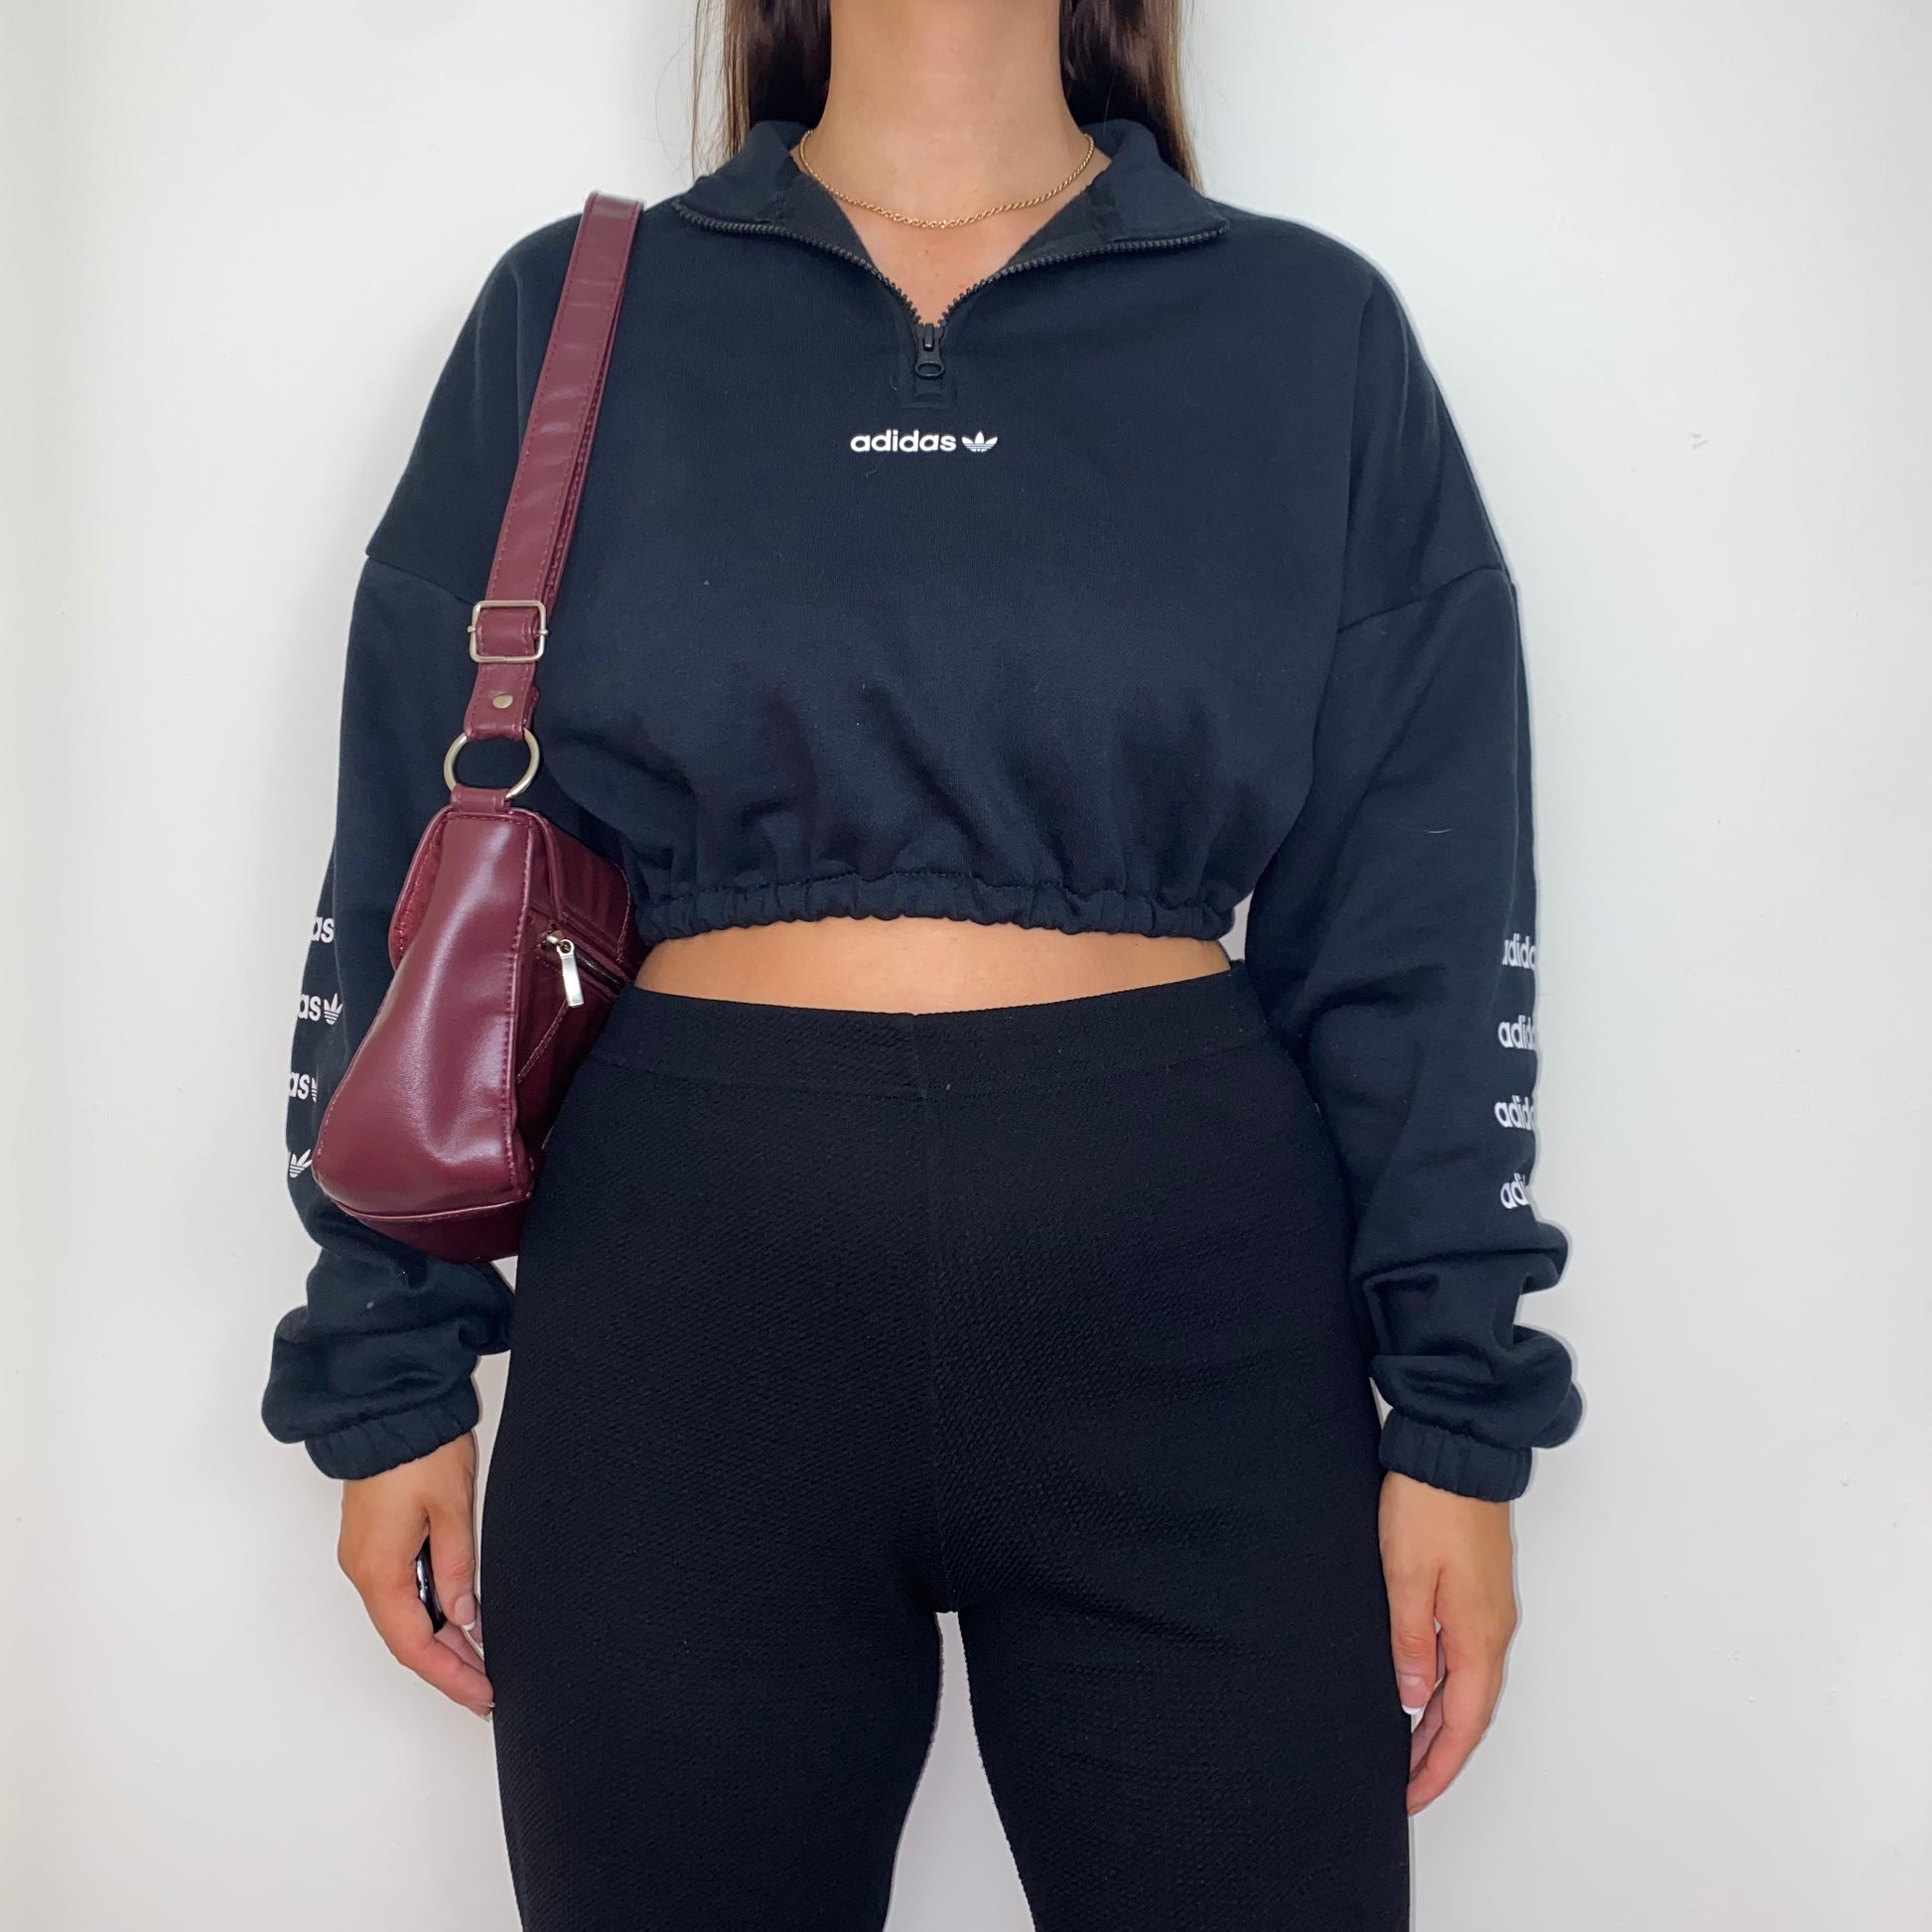 black 1/4 zip cropped sweatshirt with white adidas logo on front and sleeves shown on a model wearing black trousers and a burgundy shoulder bag